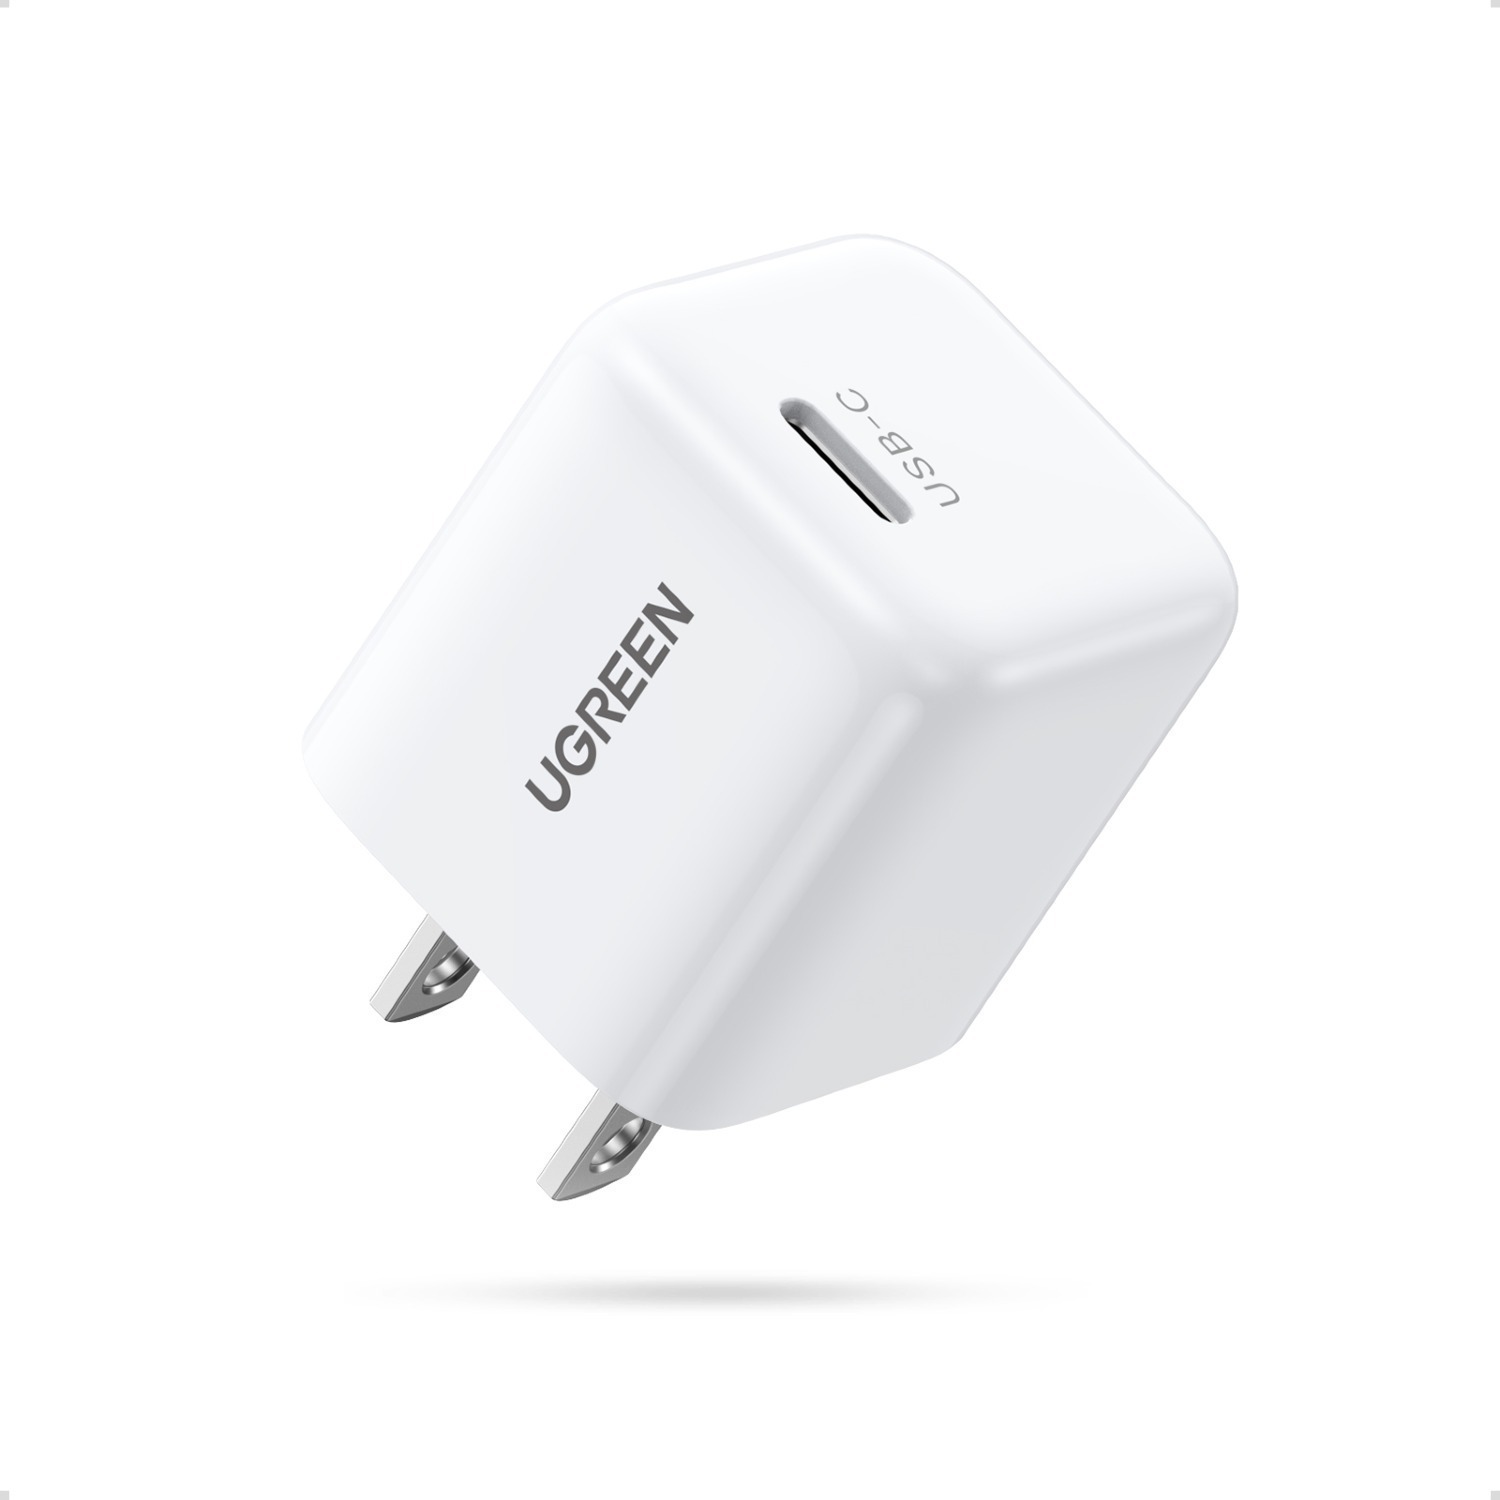 UGREEN 66w USB C Charger, 2 Ports Foldable Wall Charger, PD 65W